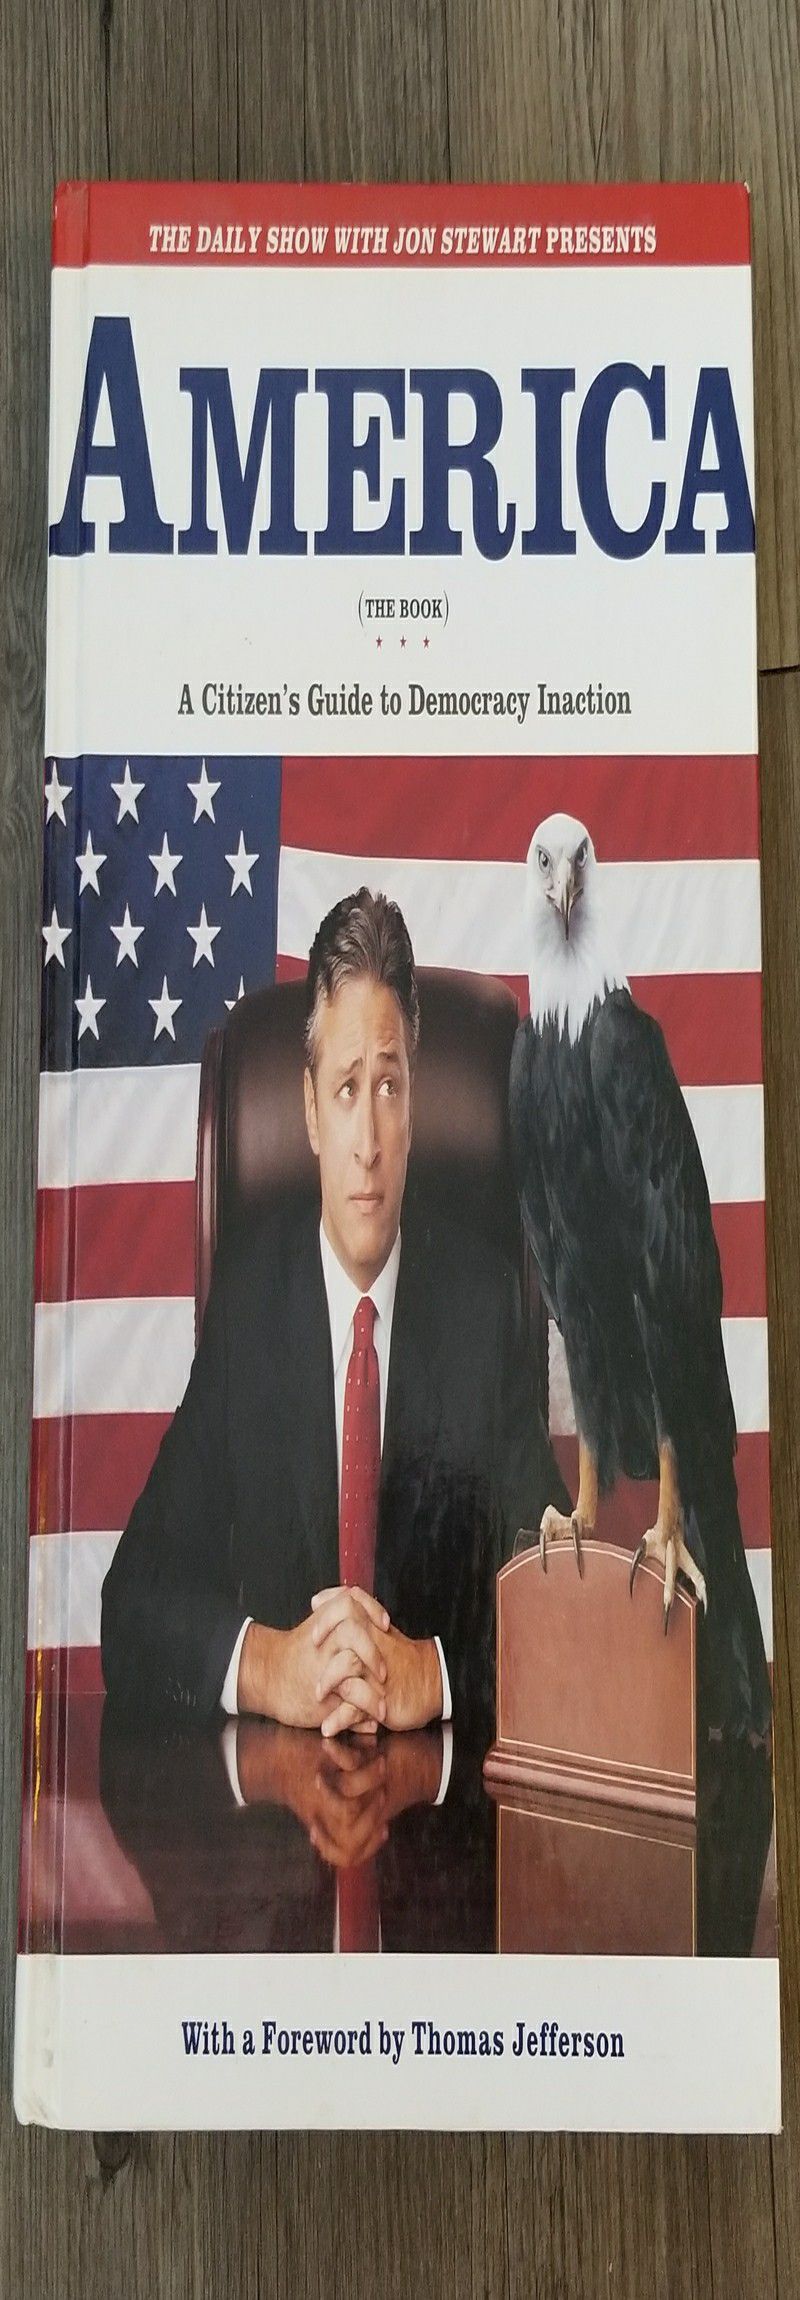 The Daily Show with Jon Stewart Presents America (The Book): A Citizen's Guide